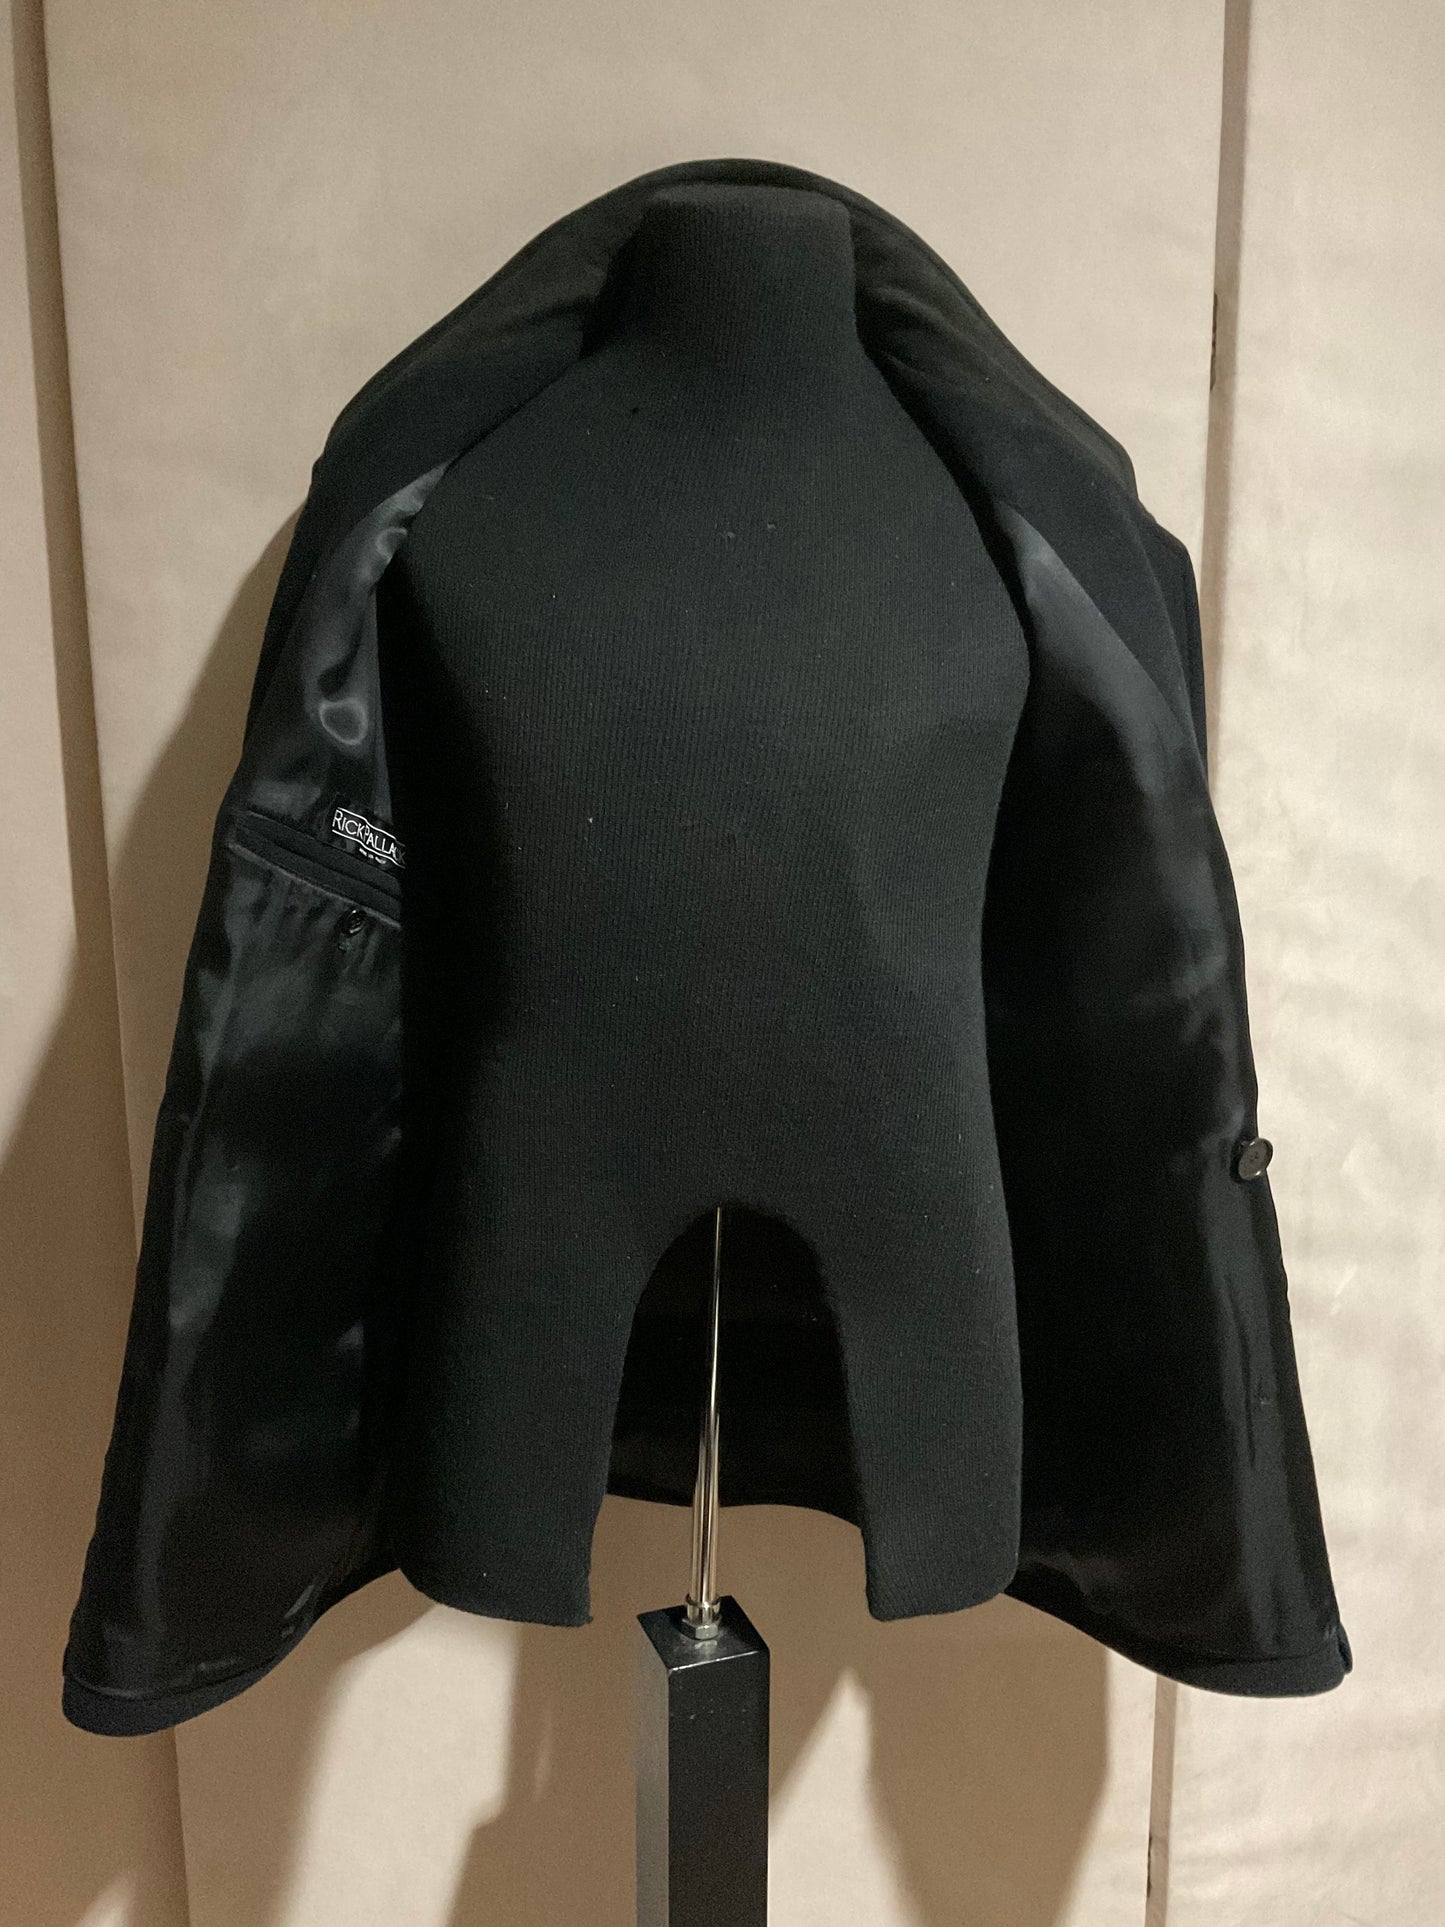 R P JACKET / BLACK WOOL & CASHMERE / SUEDE COLLAR / DOUBLE BREASTED / NEW  / MEDIUM / MADE IN ITALY